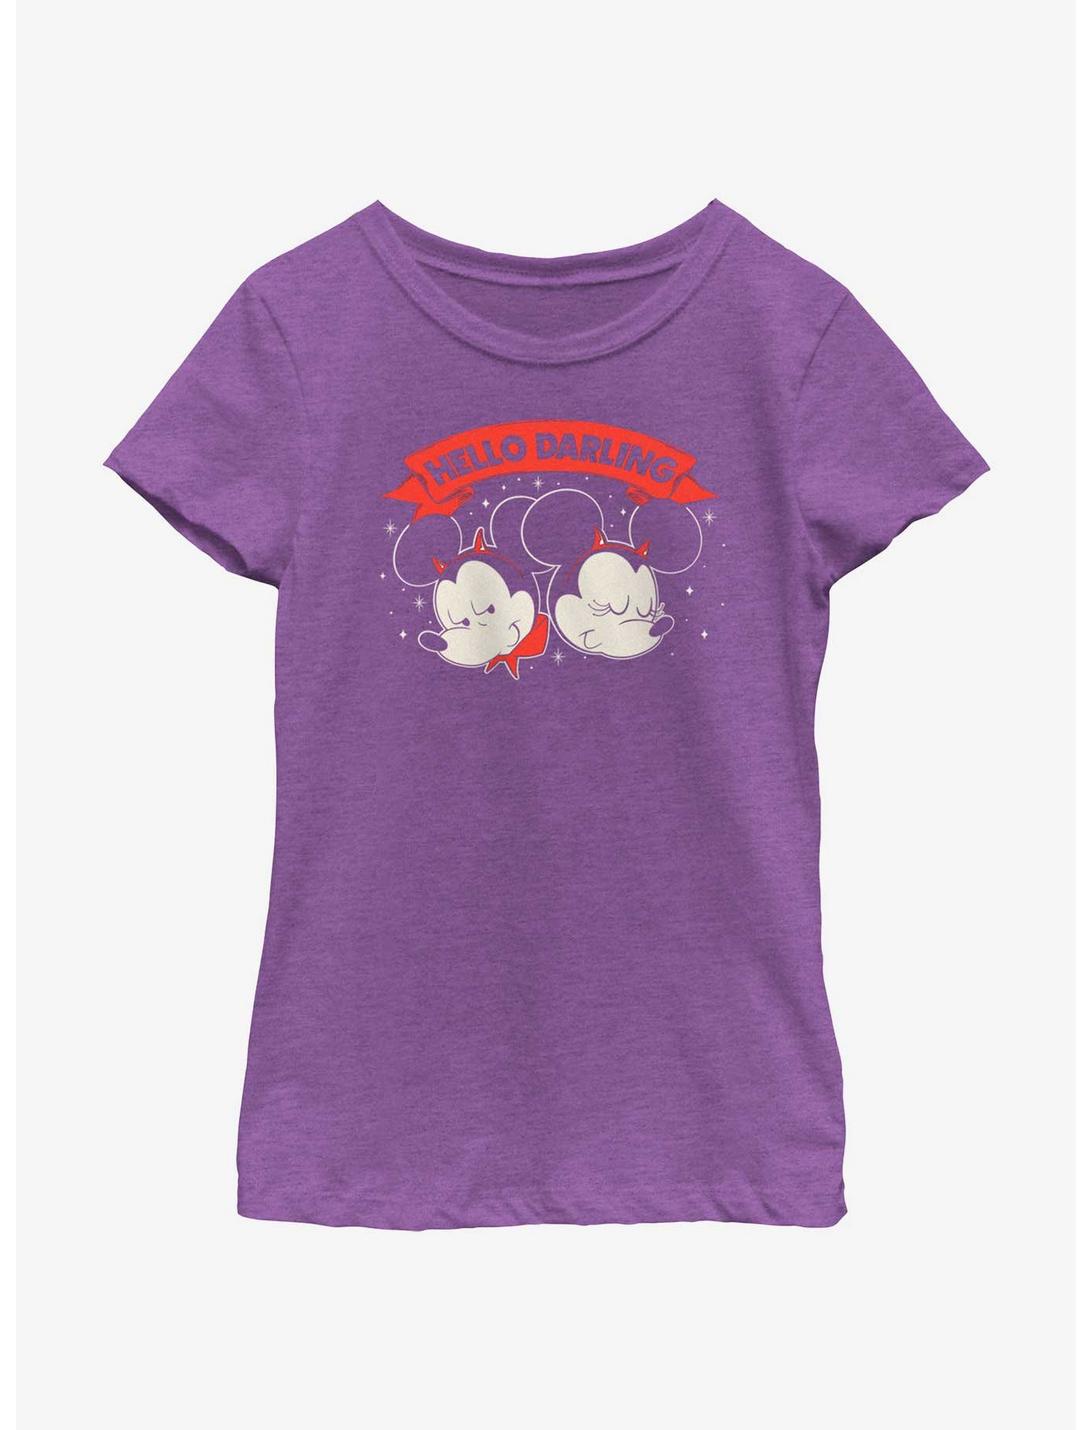 Disney Mickey Mouse Hello Darling Youth Girls T-Shirt, PURPLE BERRY, hi-res